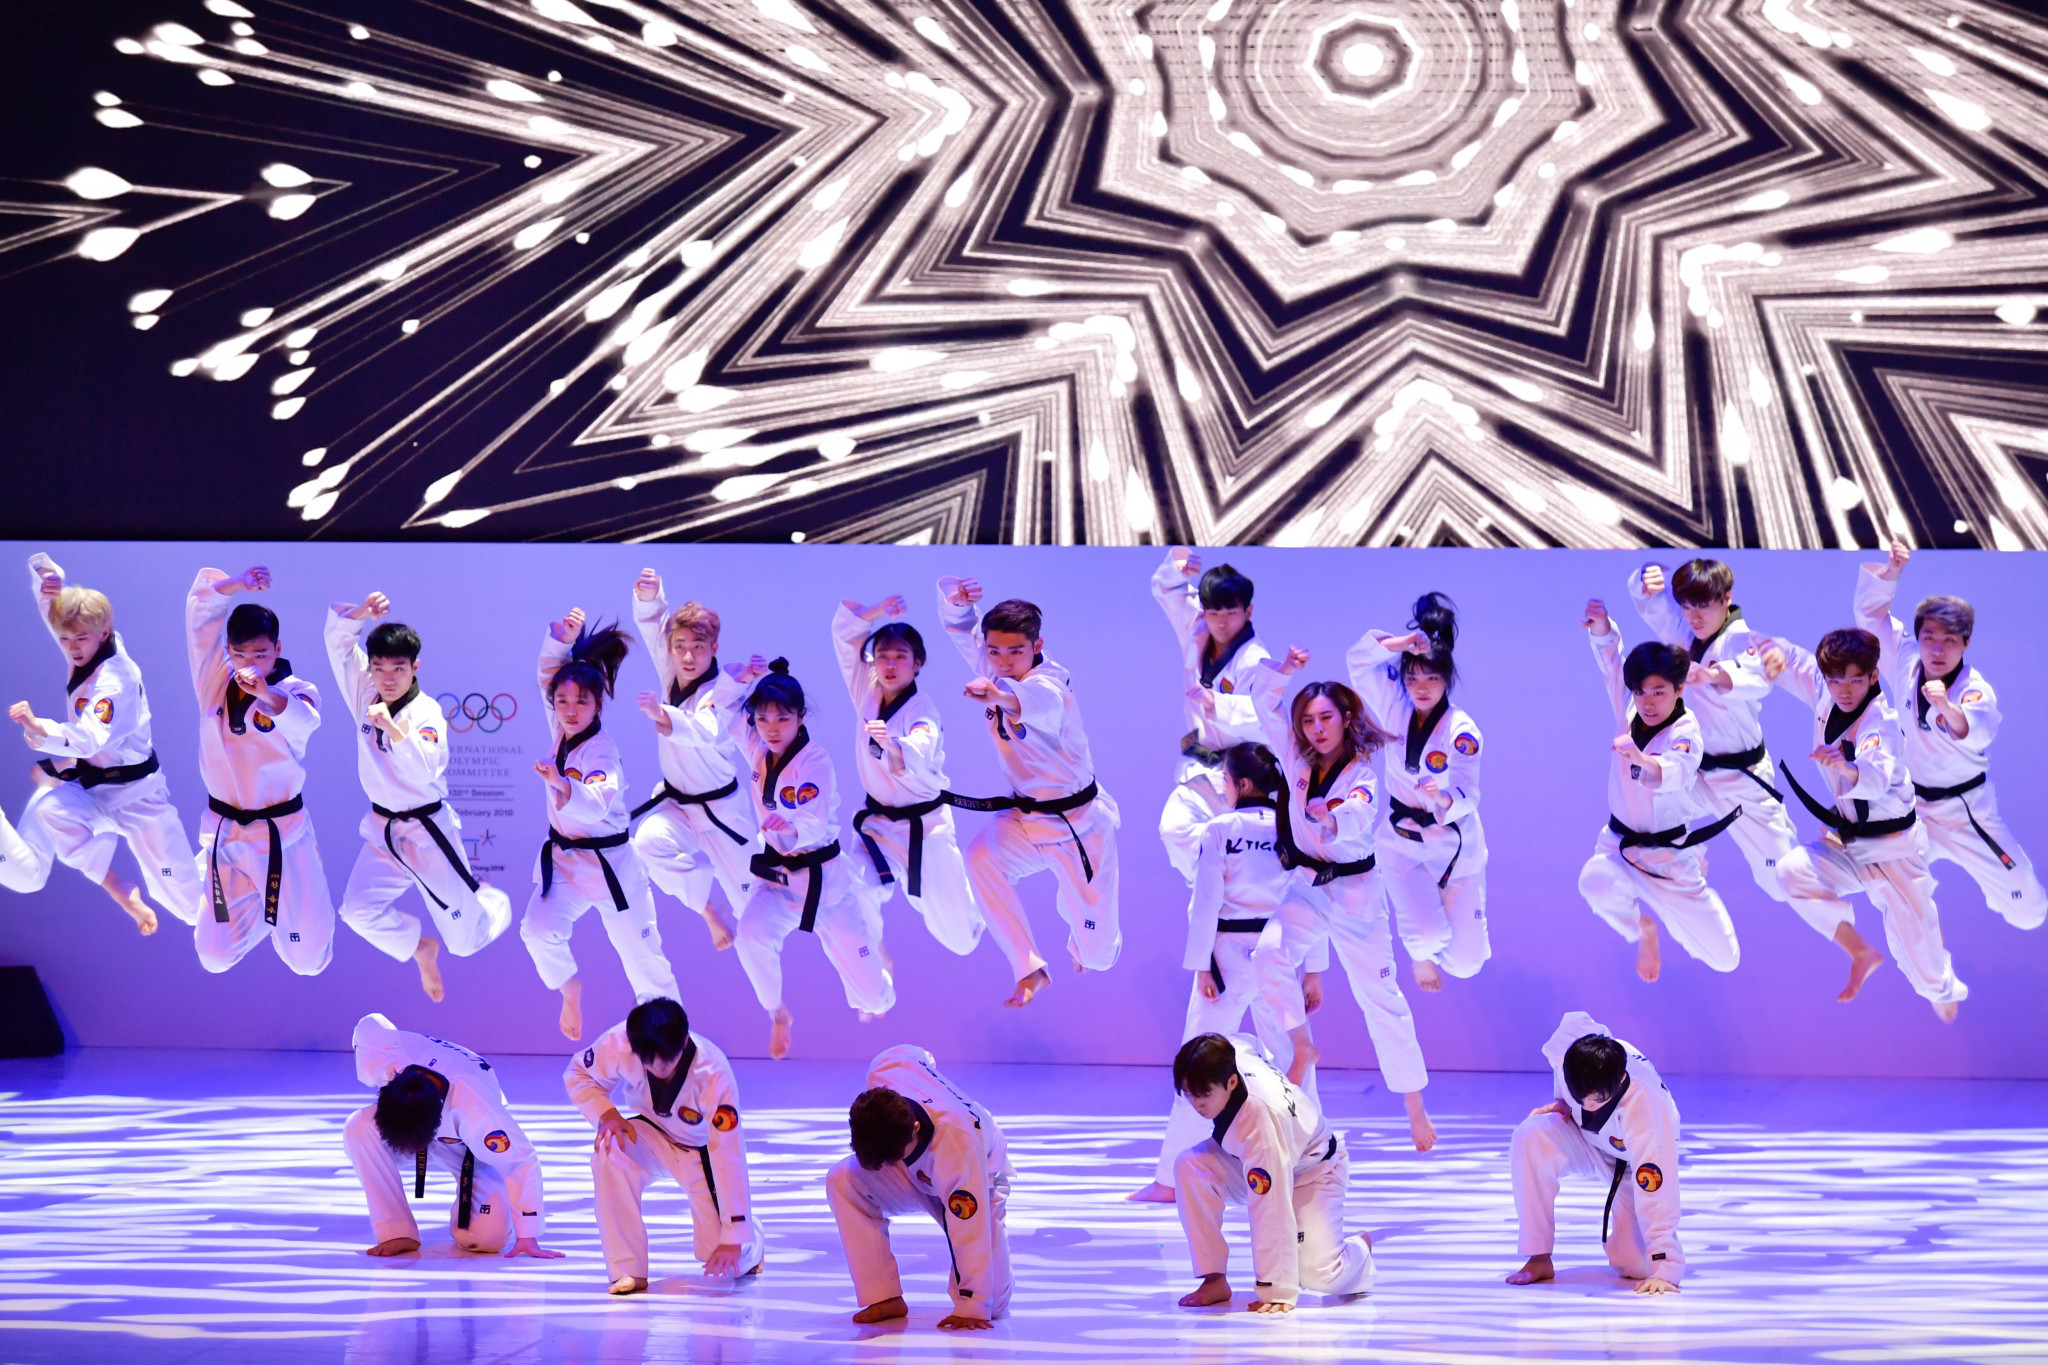 A taekwondo demonstration team perform at the opening of the IOC Session ©Getty Images